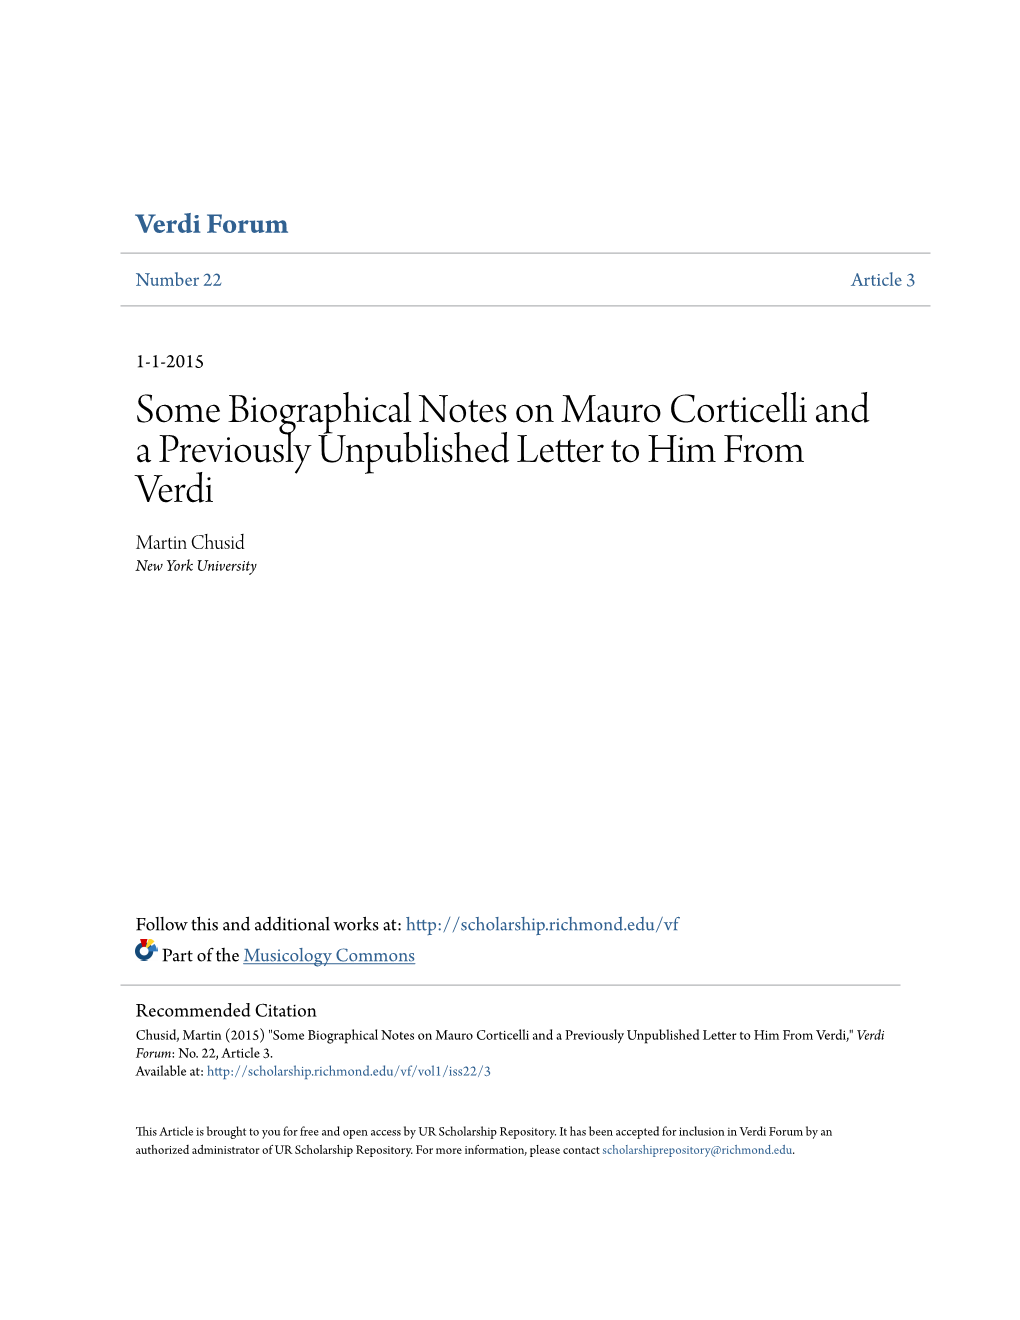 Some Biographical Notes on Mauro Corticelli and a Previously Unpublished Letter to Him from Verdi Martin Chusid New York University